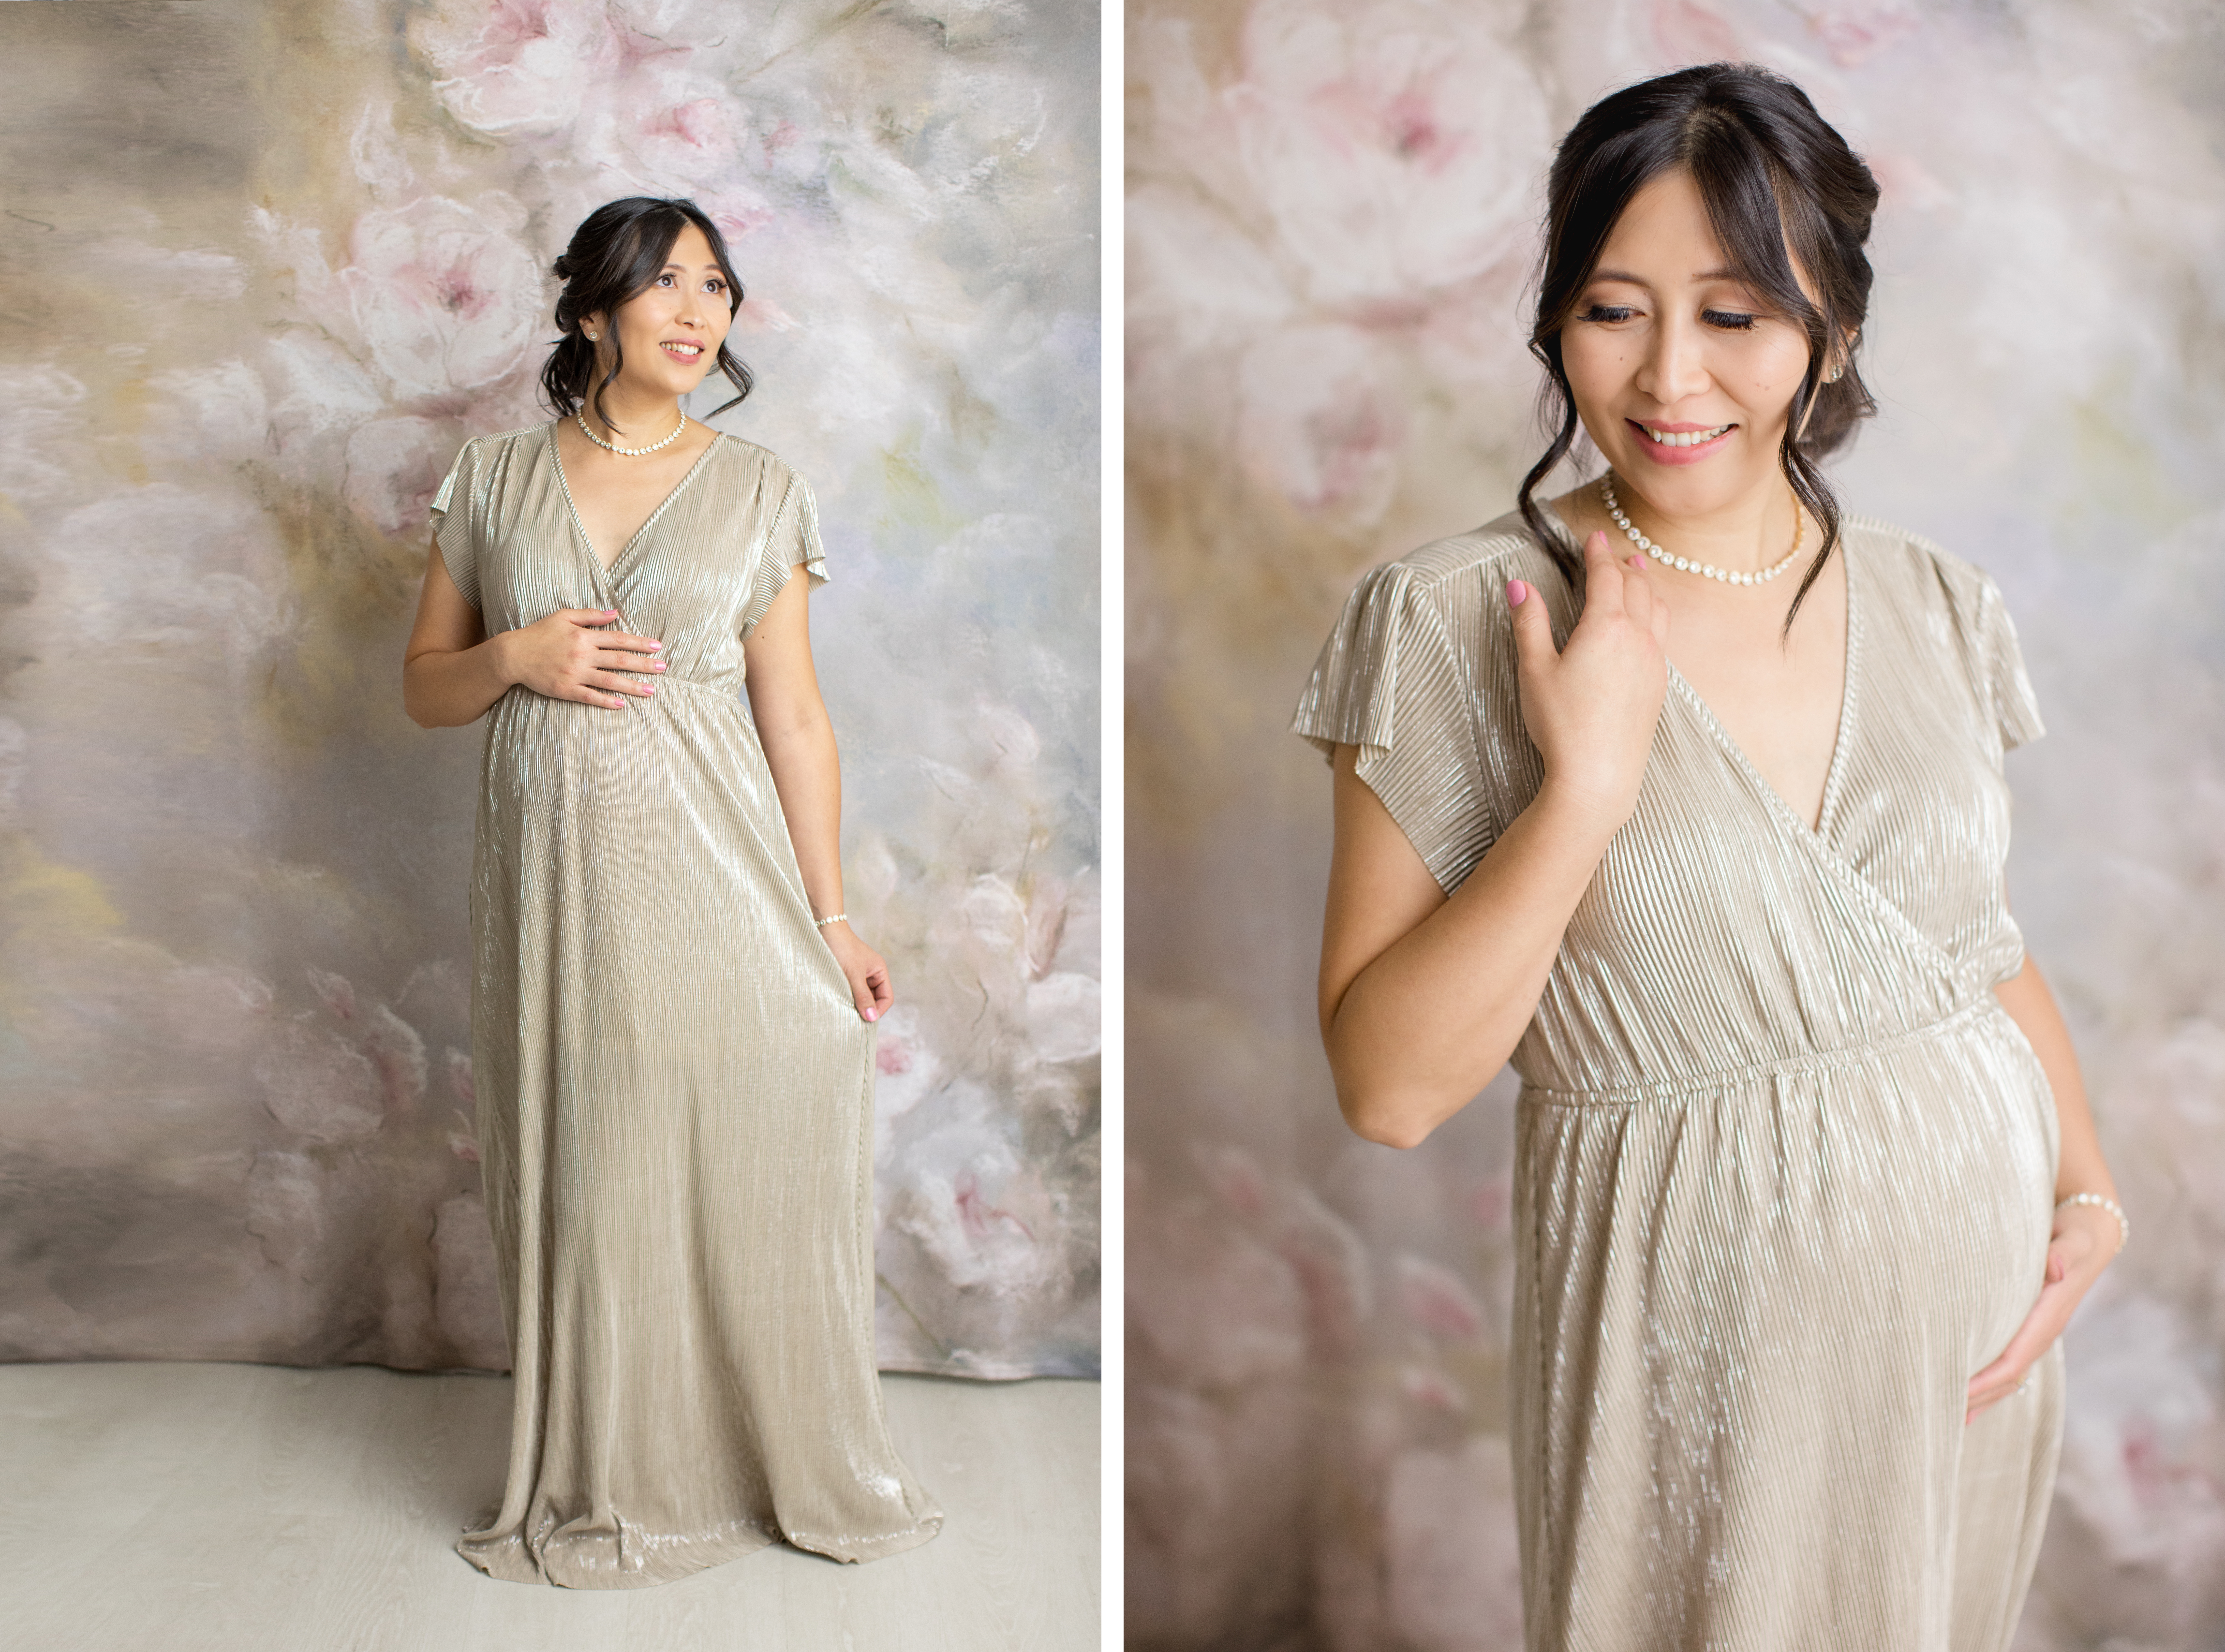 Baltic born athena dress in gold on floral backdrop maternity photos